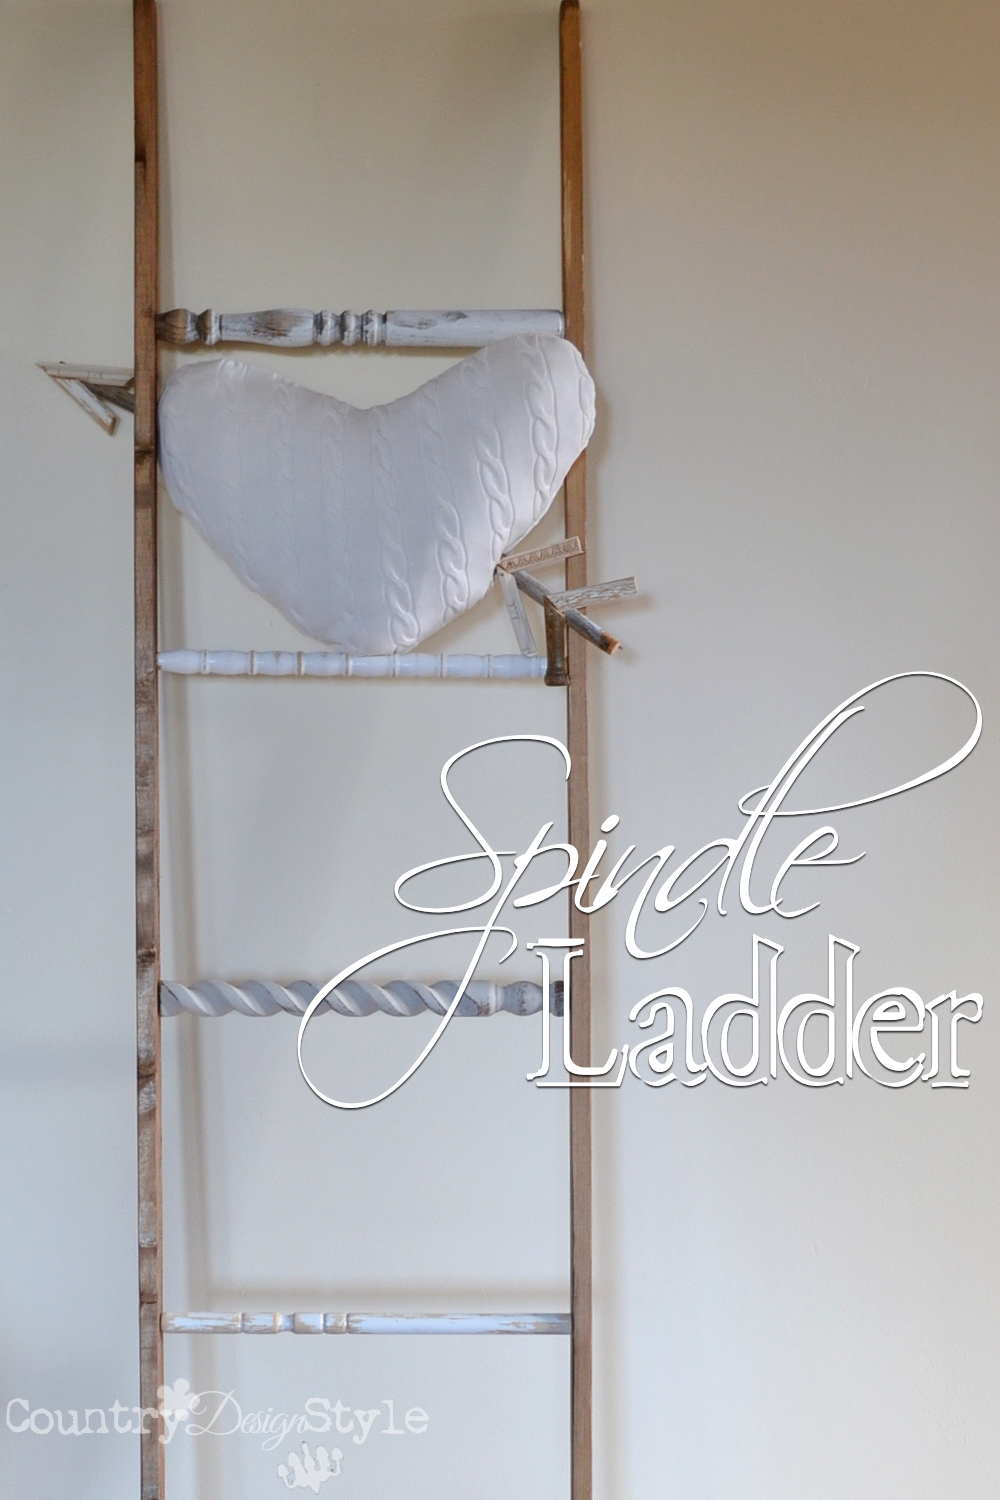 spindle-ladder-country-design-style-pn3